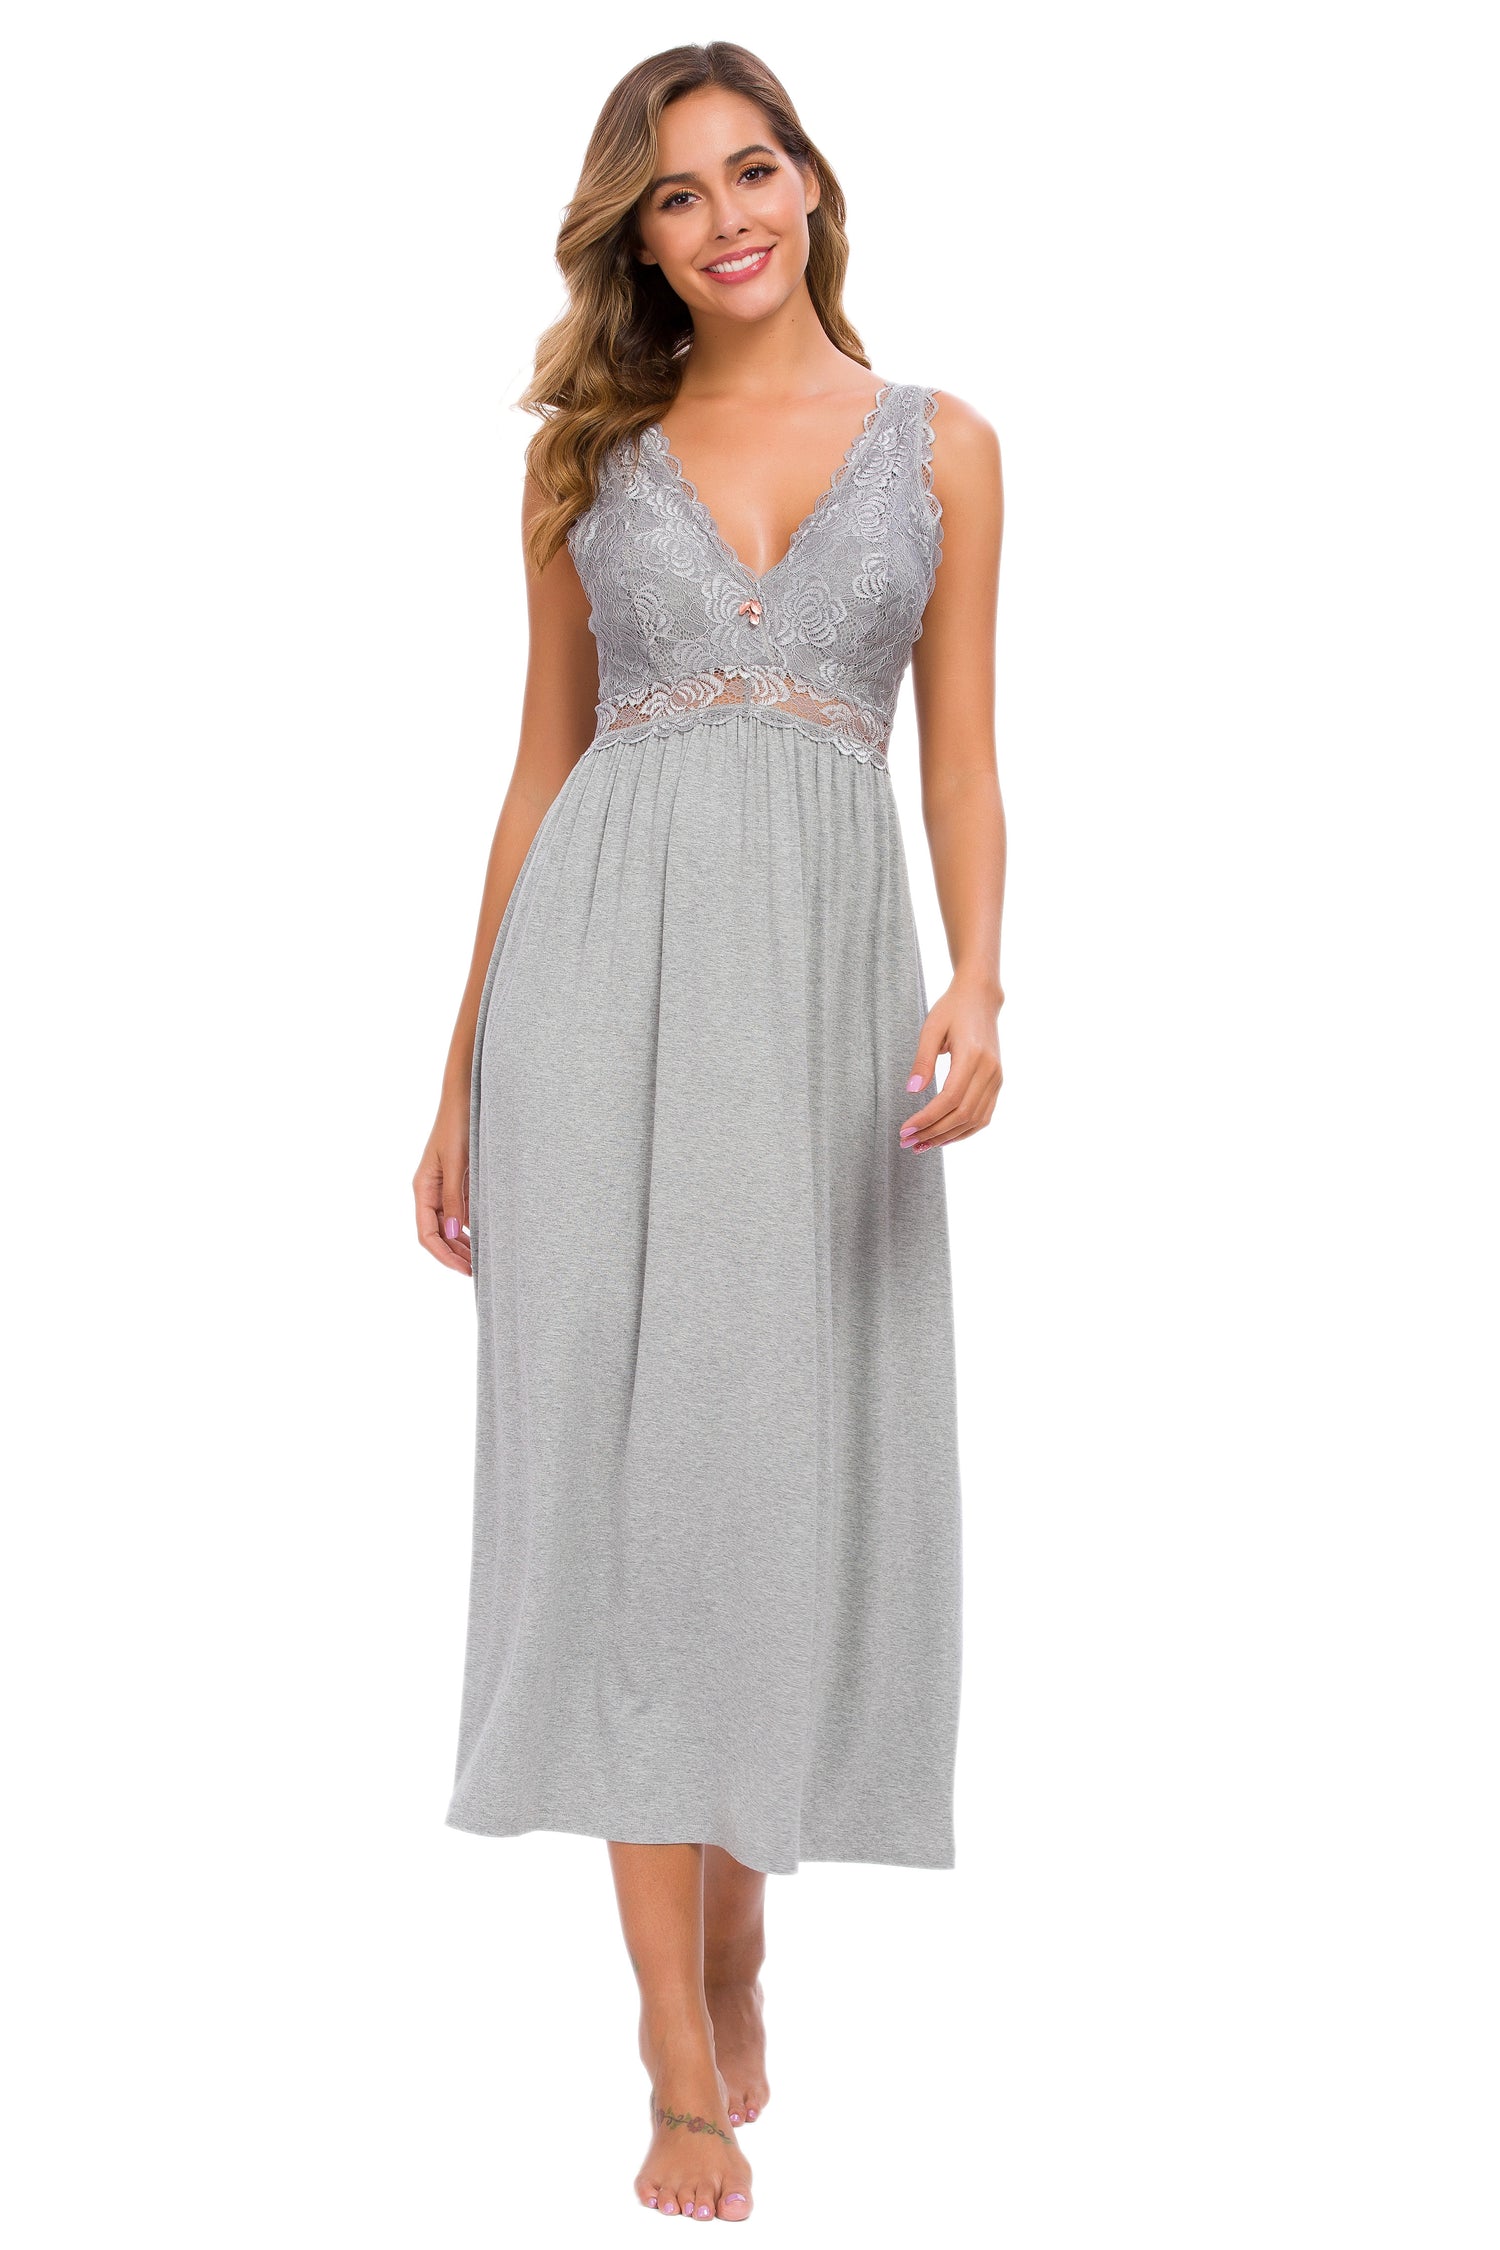 Sexy Lace Jersey  Elegant Long Nightgown Chemises Grey